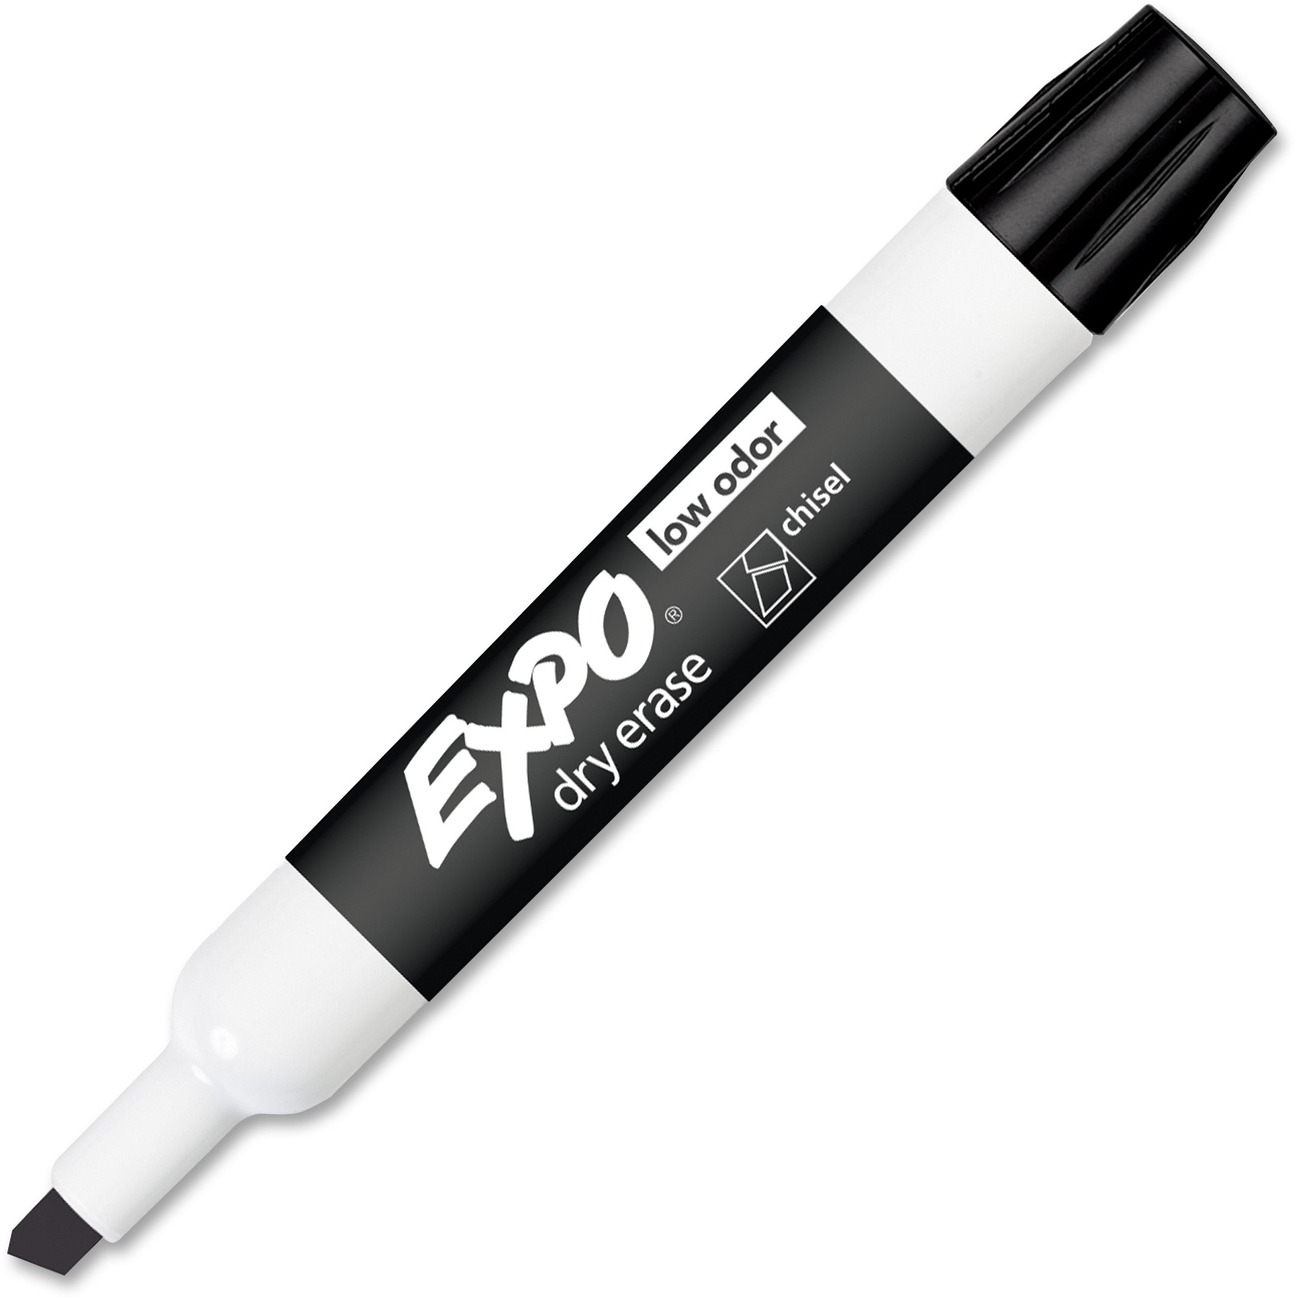 Expo Whiteboard Dry Eraser, Charcoal Gray